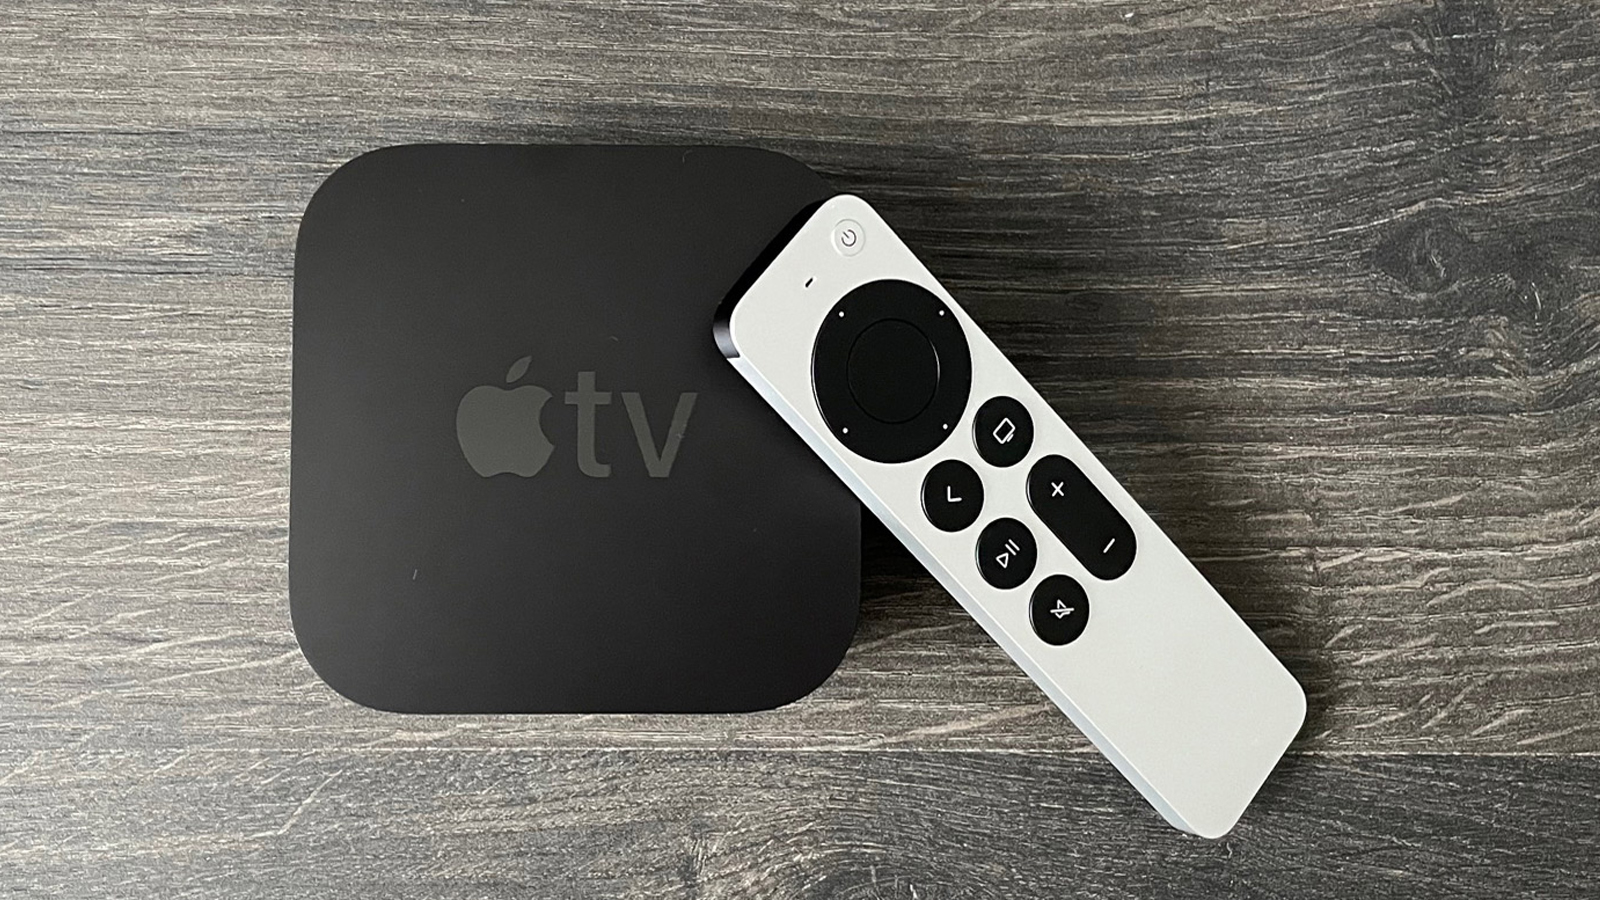 The Apple TV 4K 2021 and its remote sitting on a table